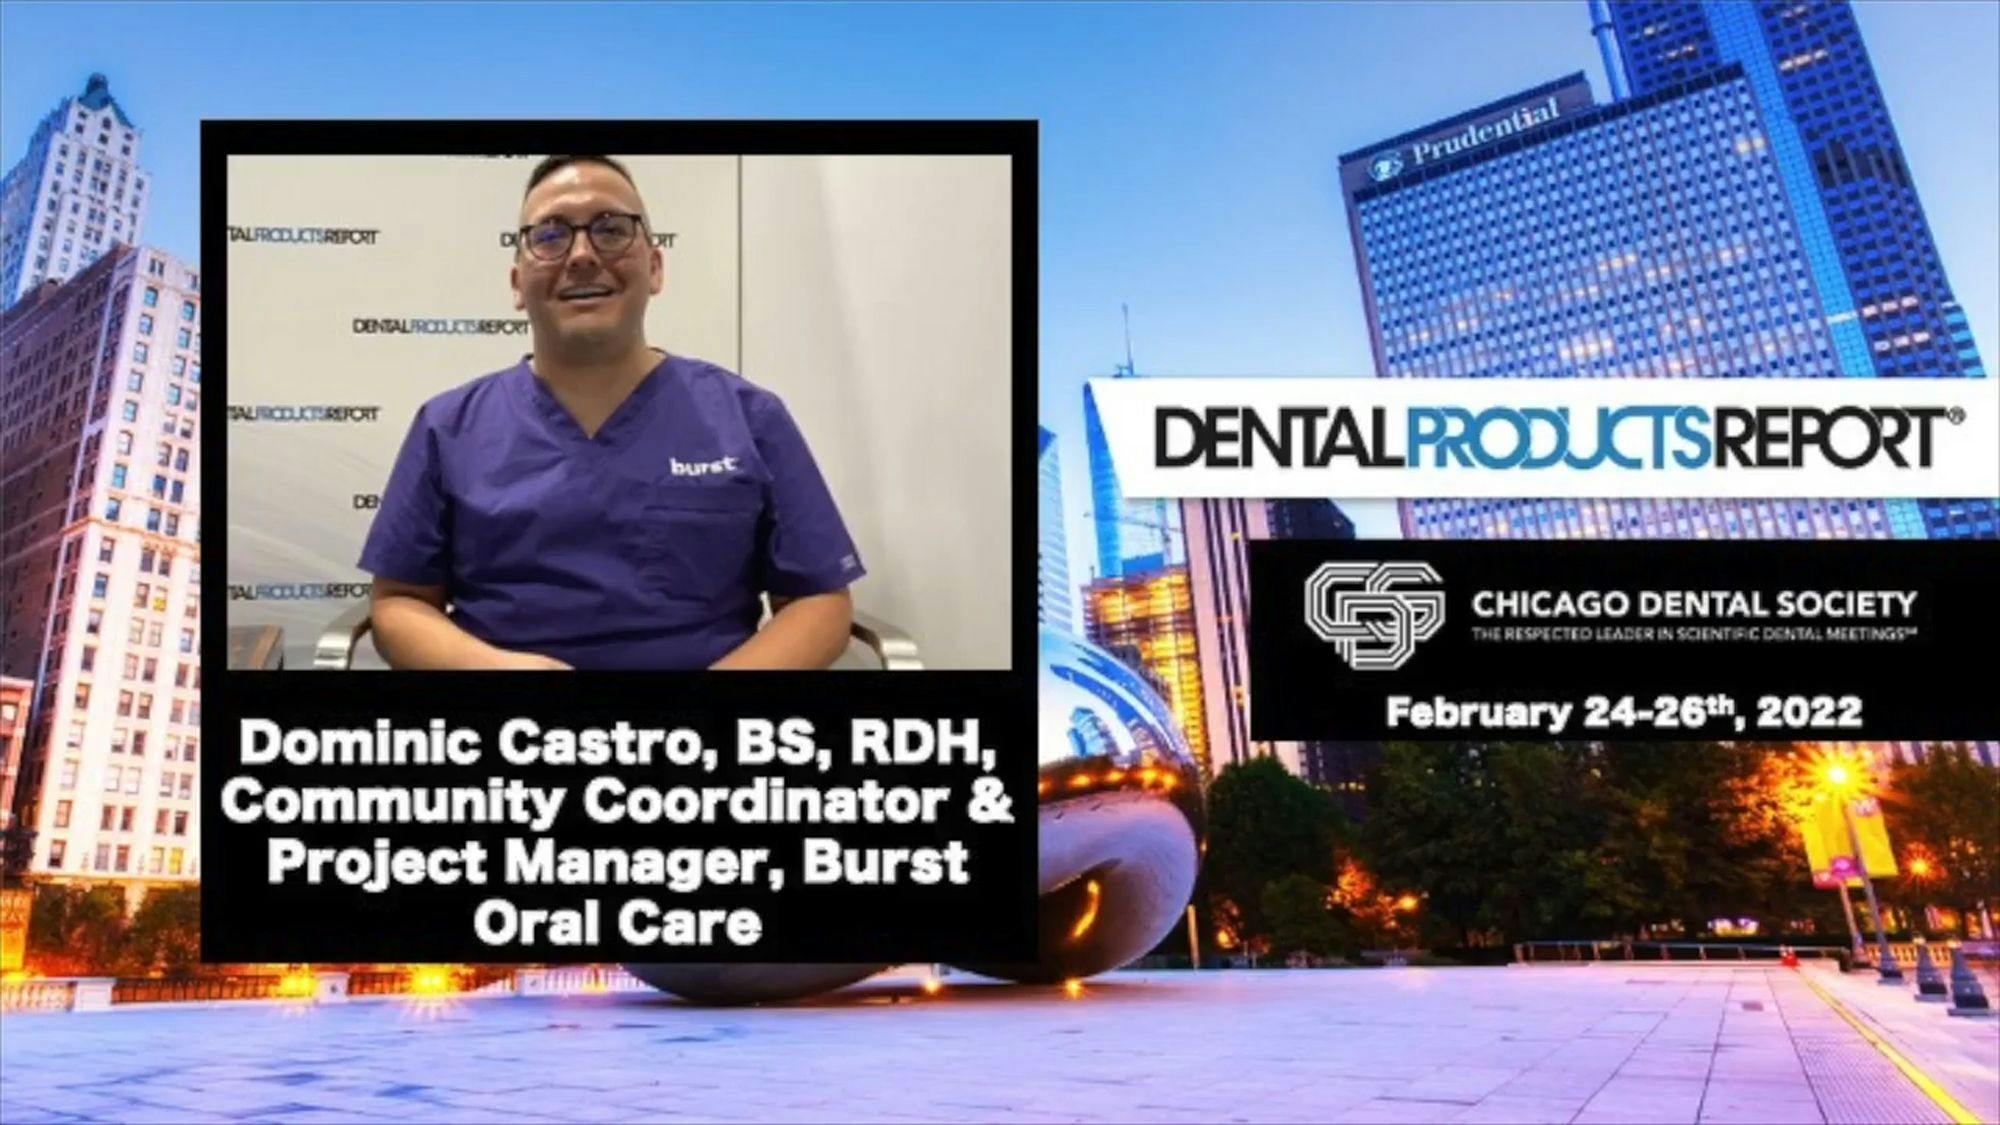 2022 Chicago Dental Society Midwinter Meeting, Interview with Dominic Castro, BS, RDH, Burst Oral Care